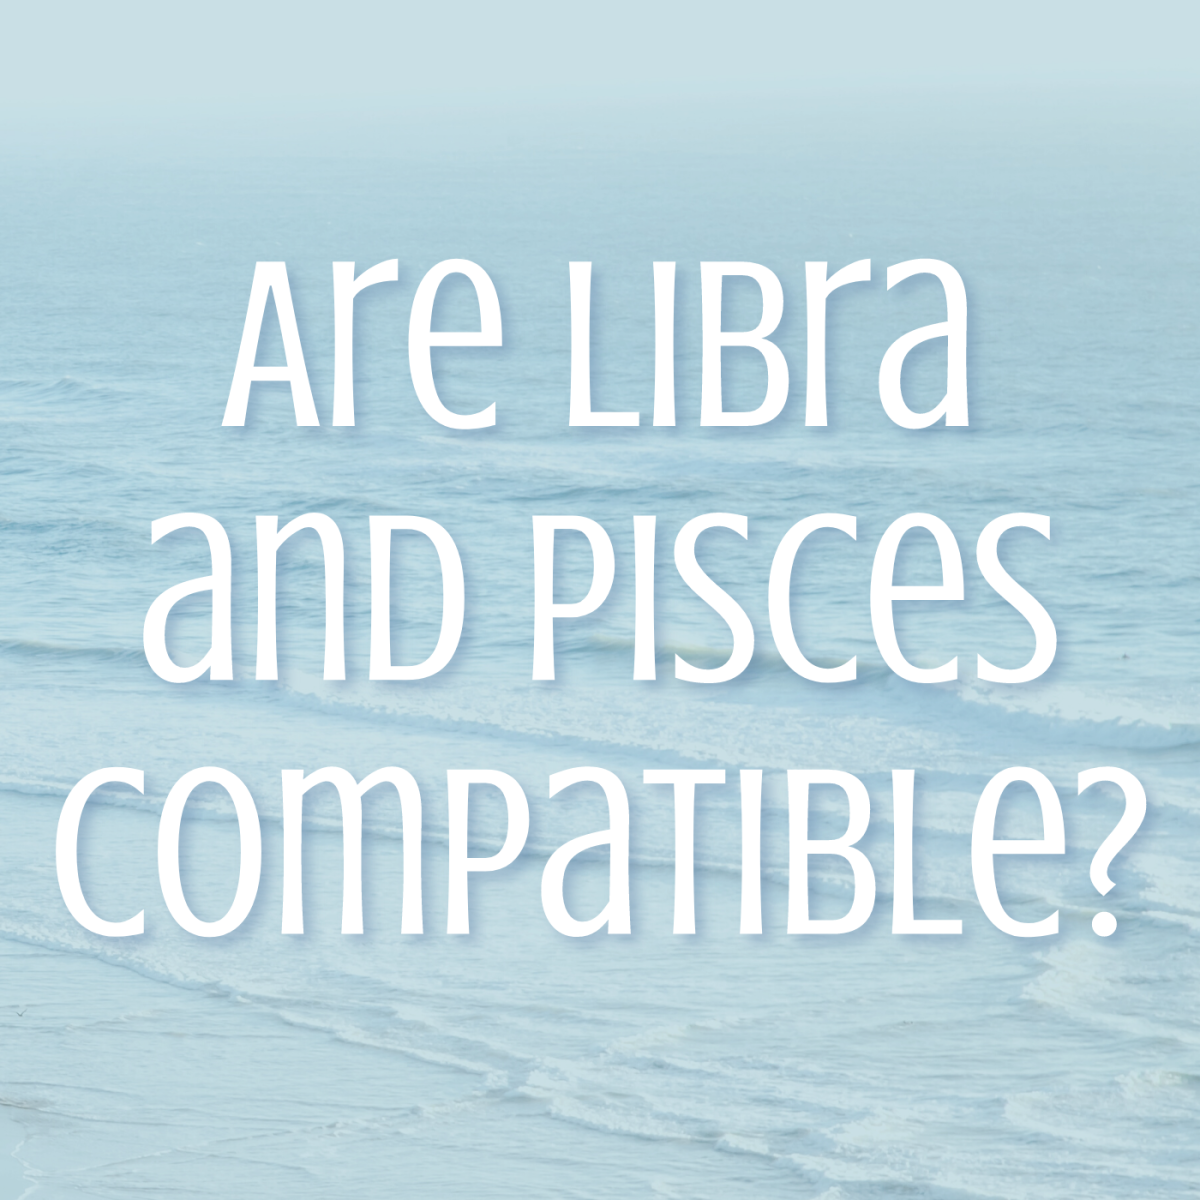 Libra is an air sign, and Pisces is a water sign. Are they soulmates?